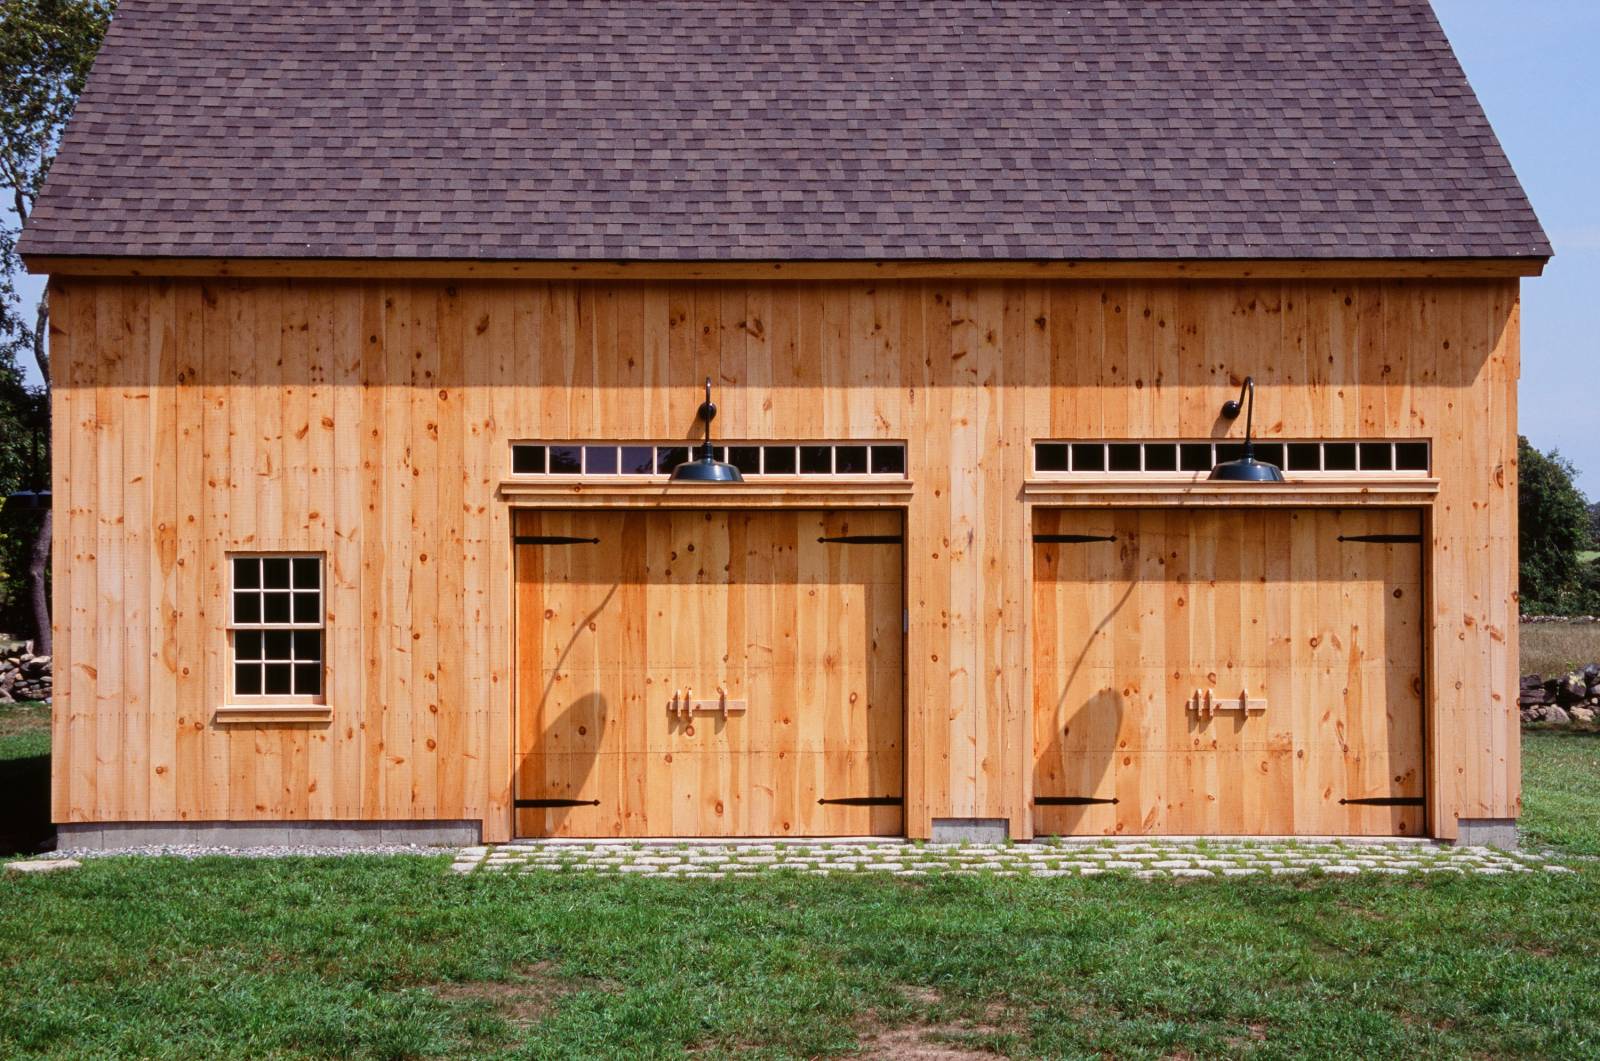 Pine faced garage doors with transoms above